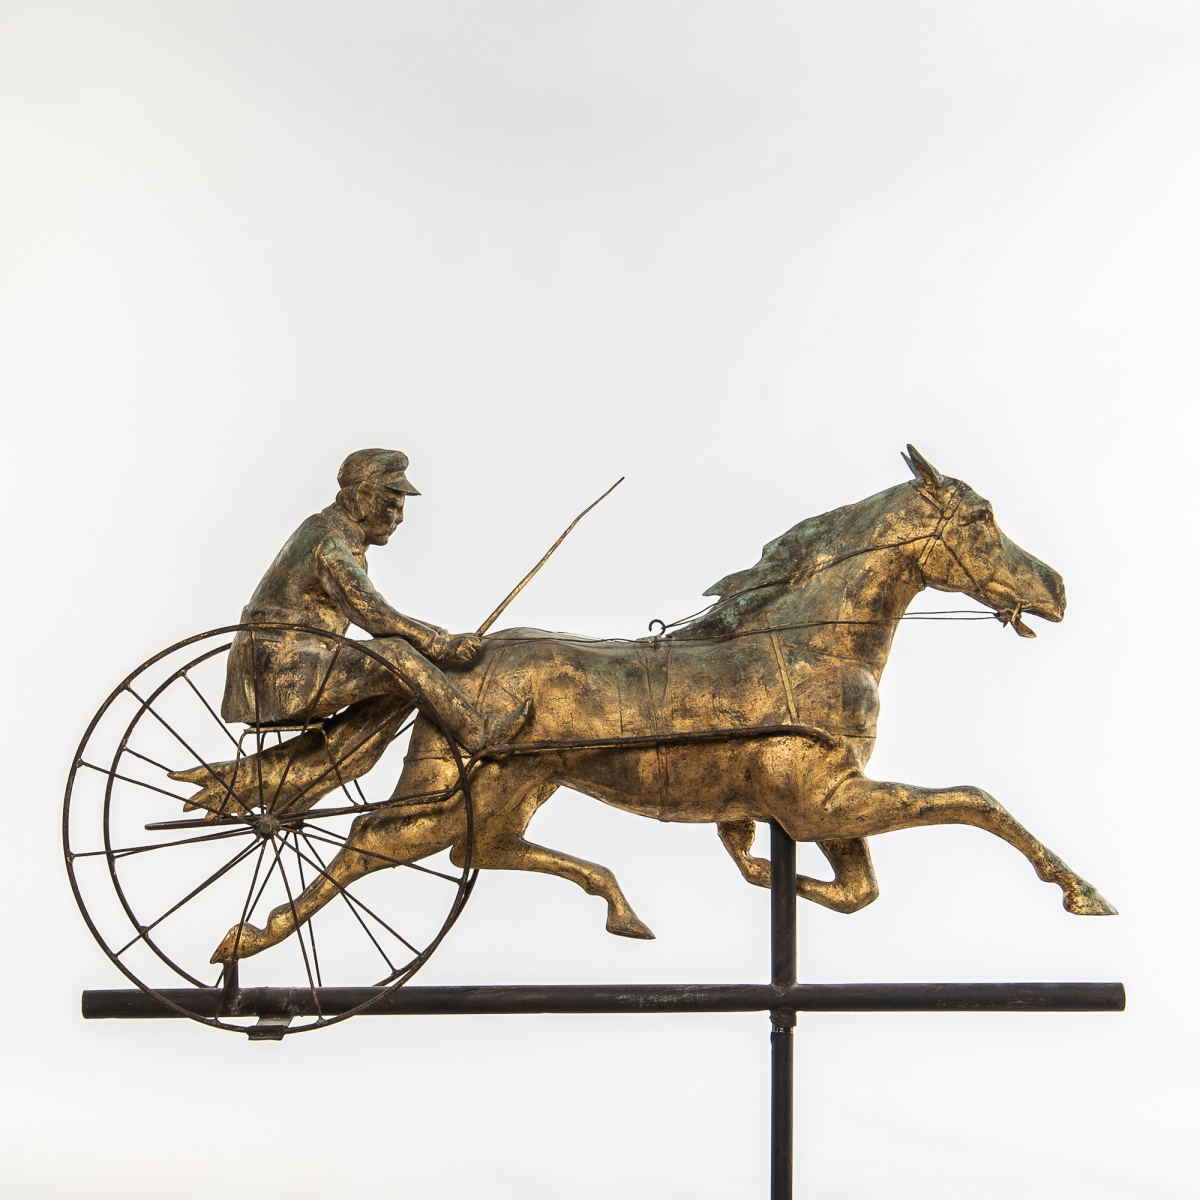 Molded and Gilded Sheet Copper Horse and Sulky Weathervane, J.L. Mott Iron Works, New York, c. 1890